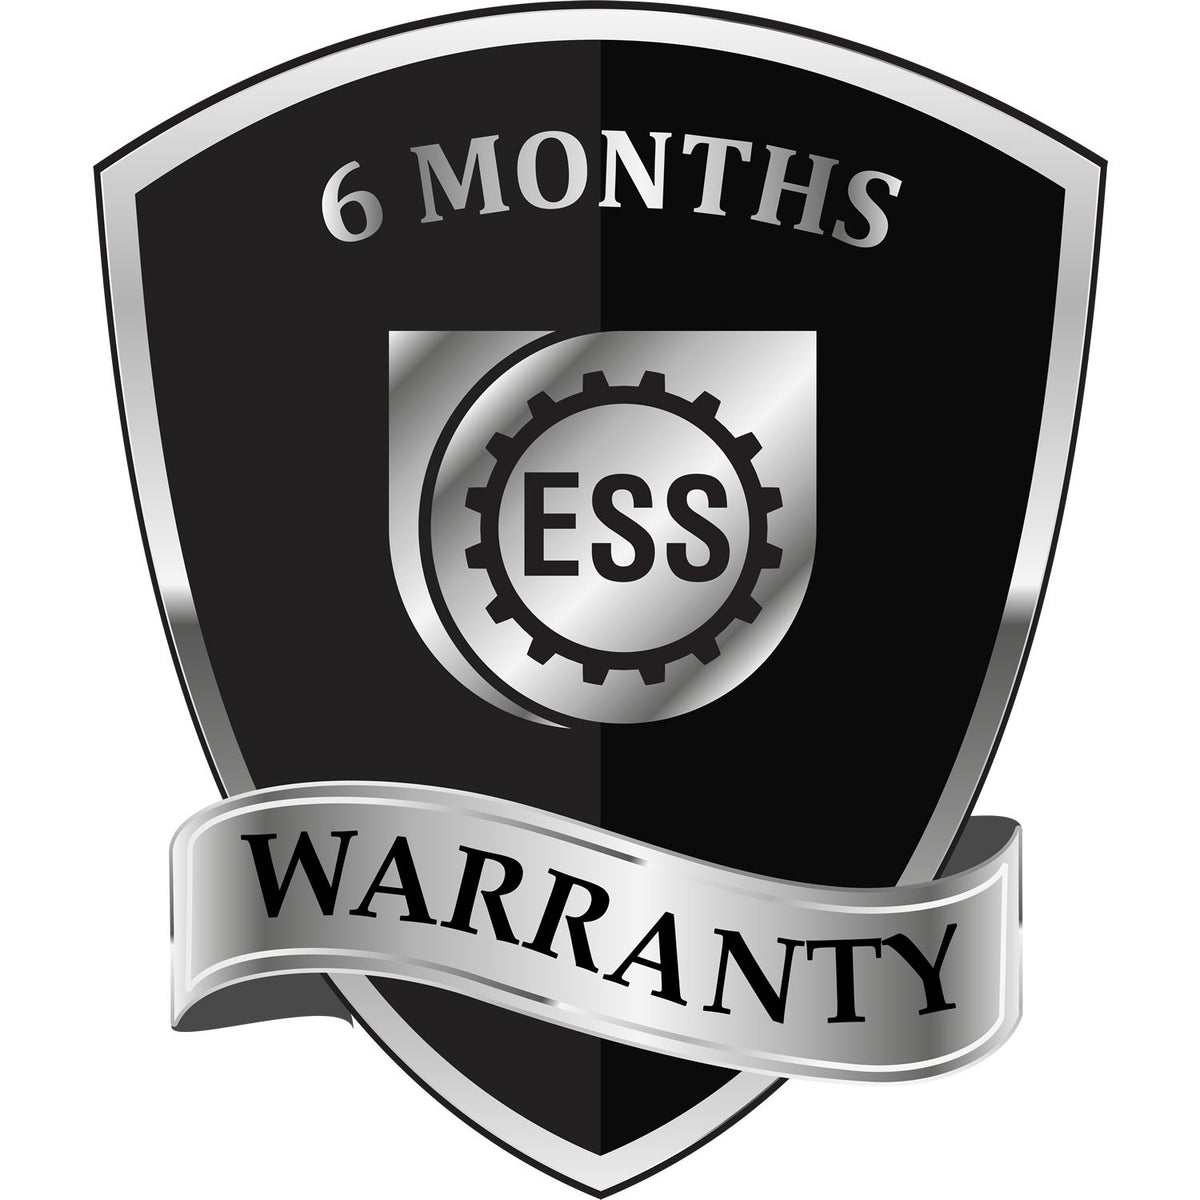 A badge or emblem showing a warranty icon for the South Carolina Professional Engineer Seal Stamp